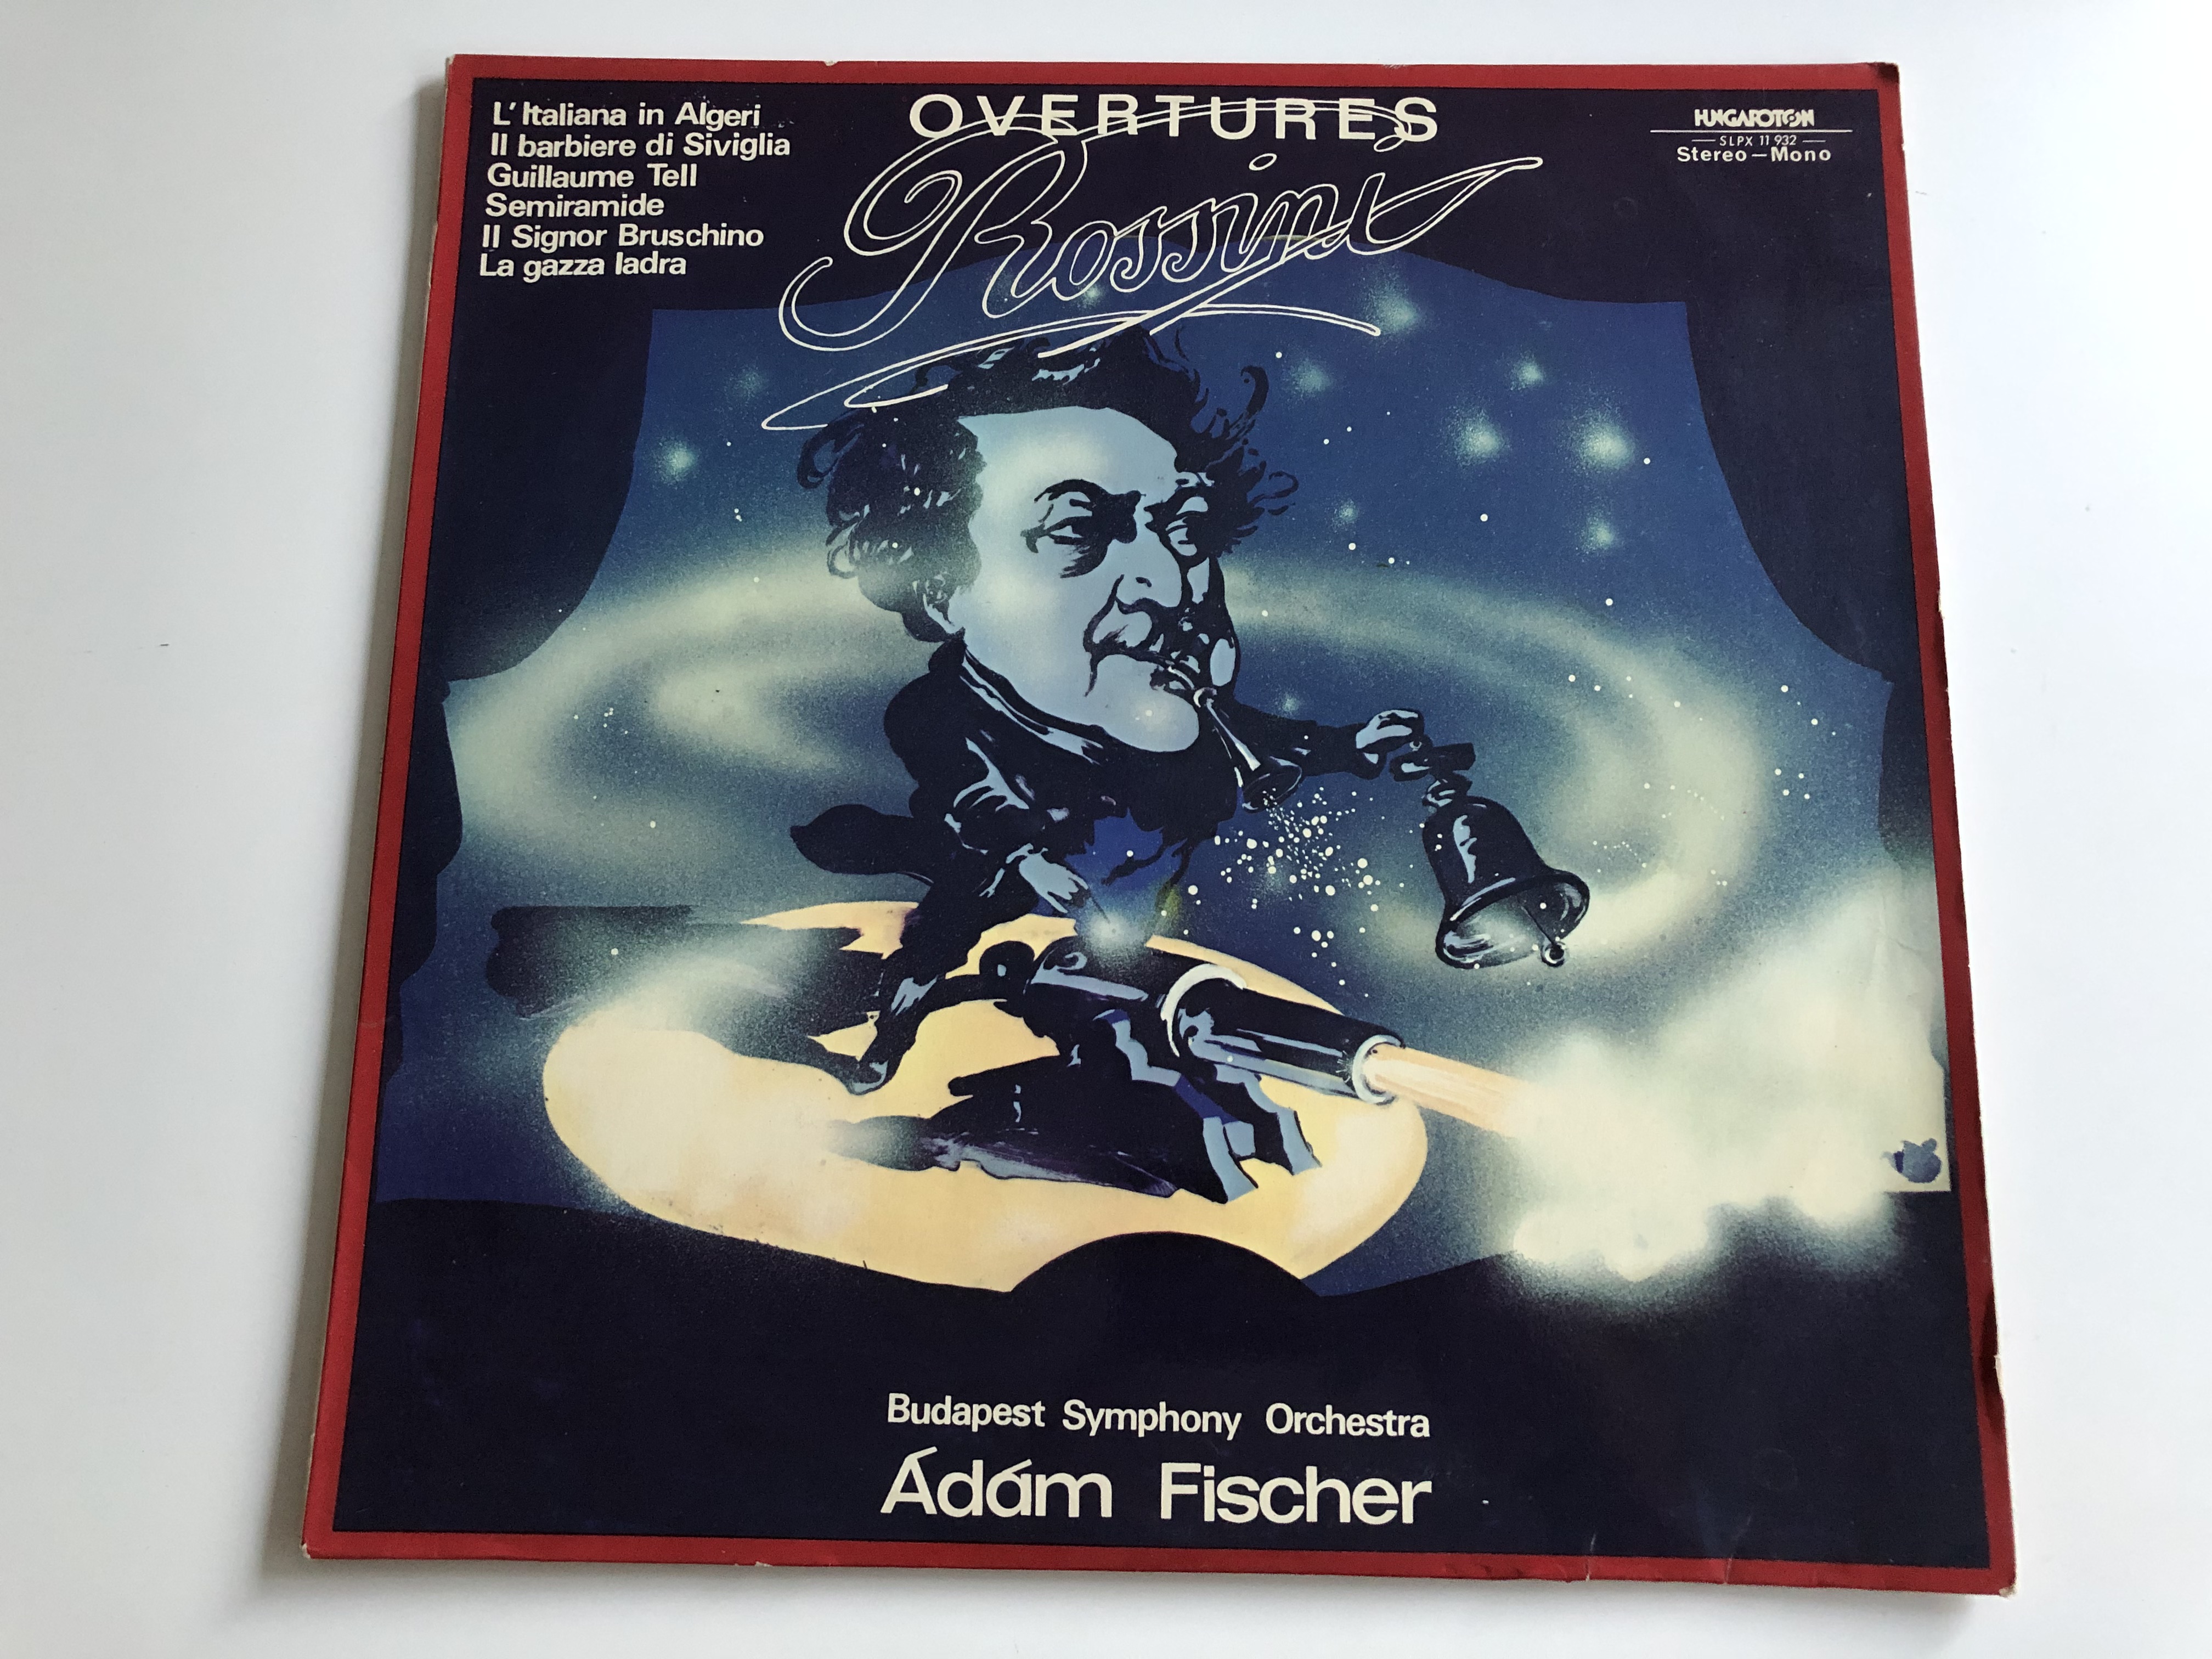 overtures-rossini-conducted-d-m-fischer-budapest-symphony-orchestra-hungaroton-lp-stereo-mono-slpx-11932-1-.jpg